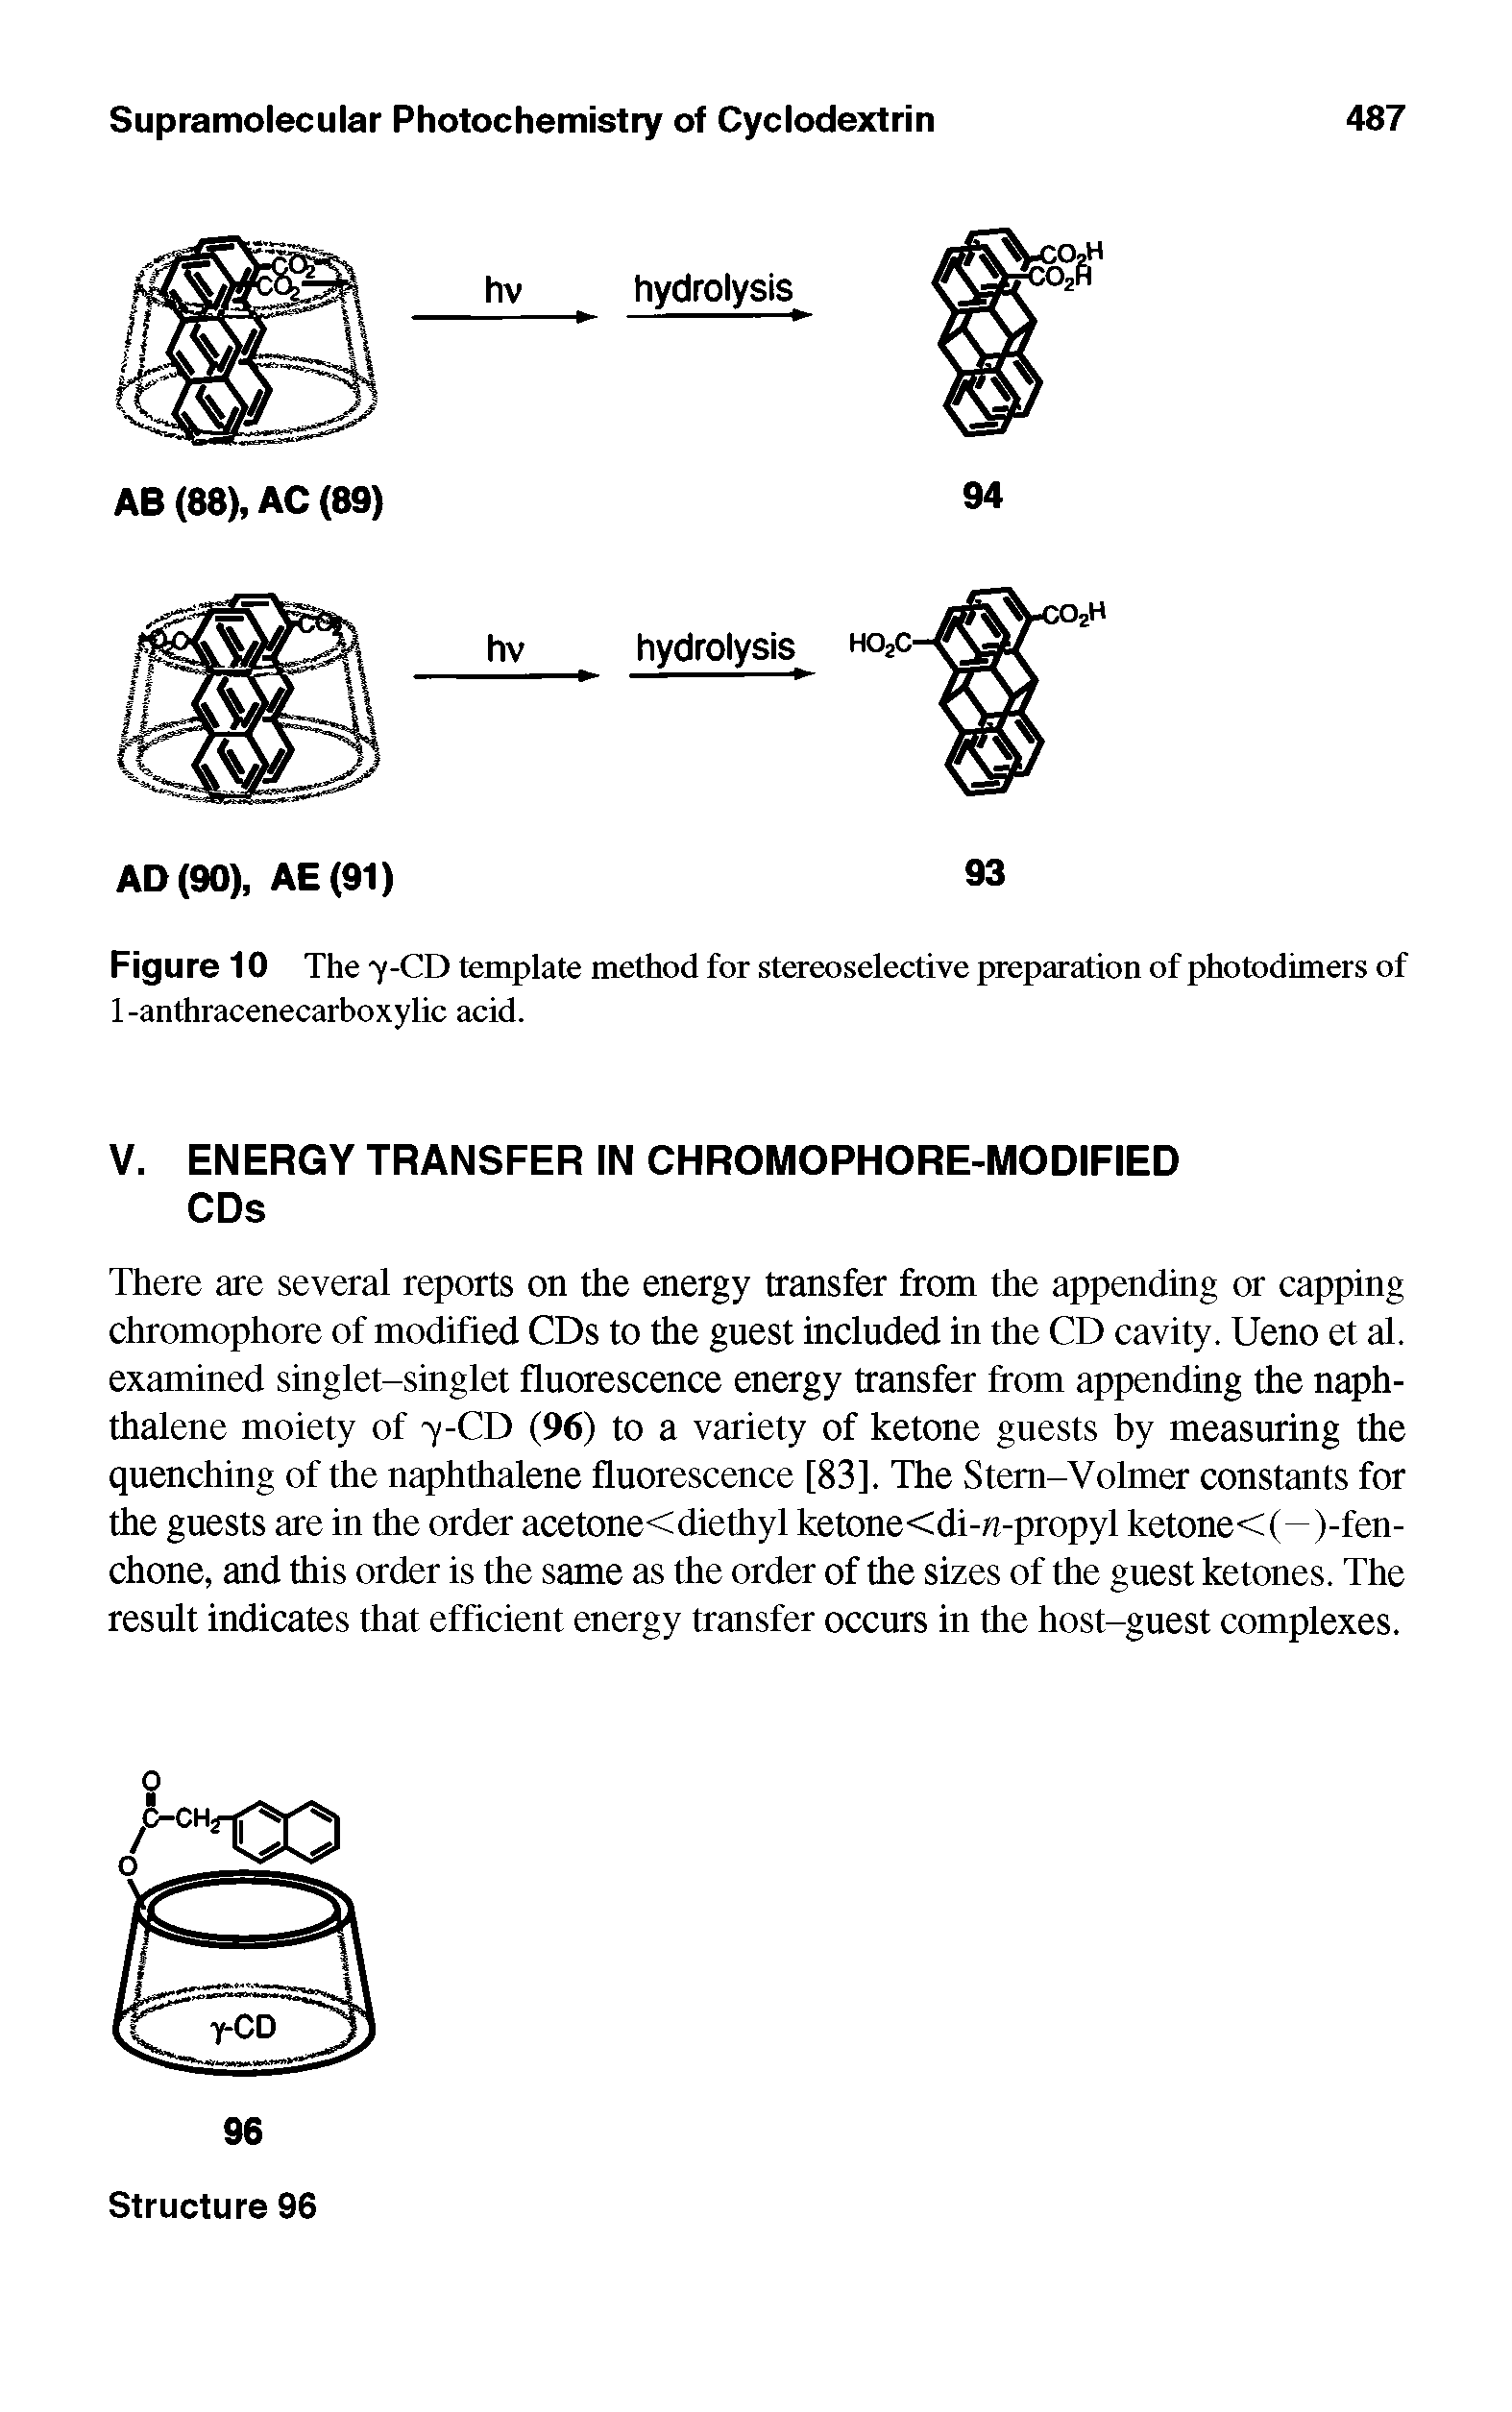 Figure 10 The y-CD template method for stereoselective preparation of photodimers of 1-anthracenecarboxylic acid.